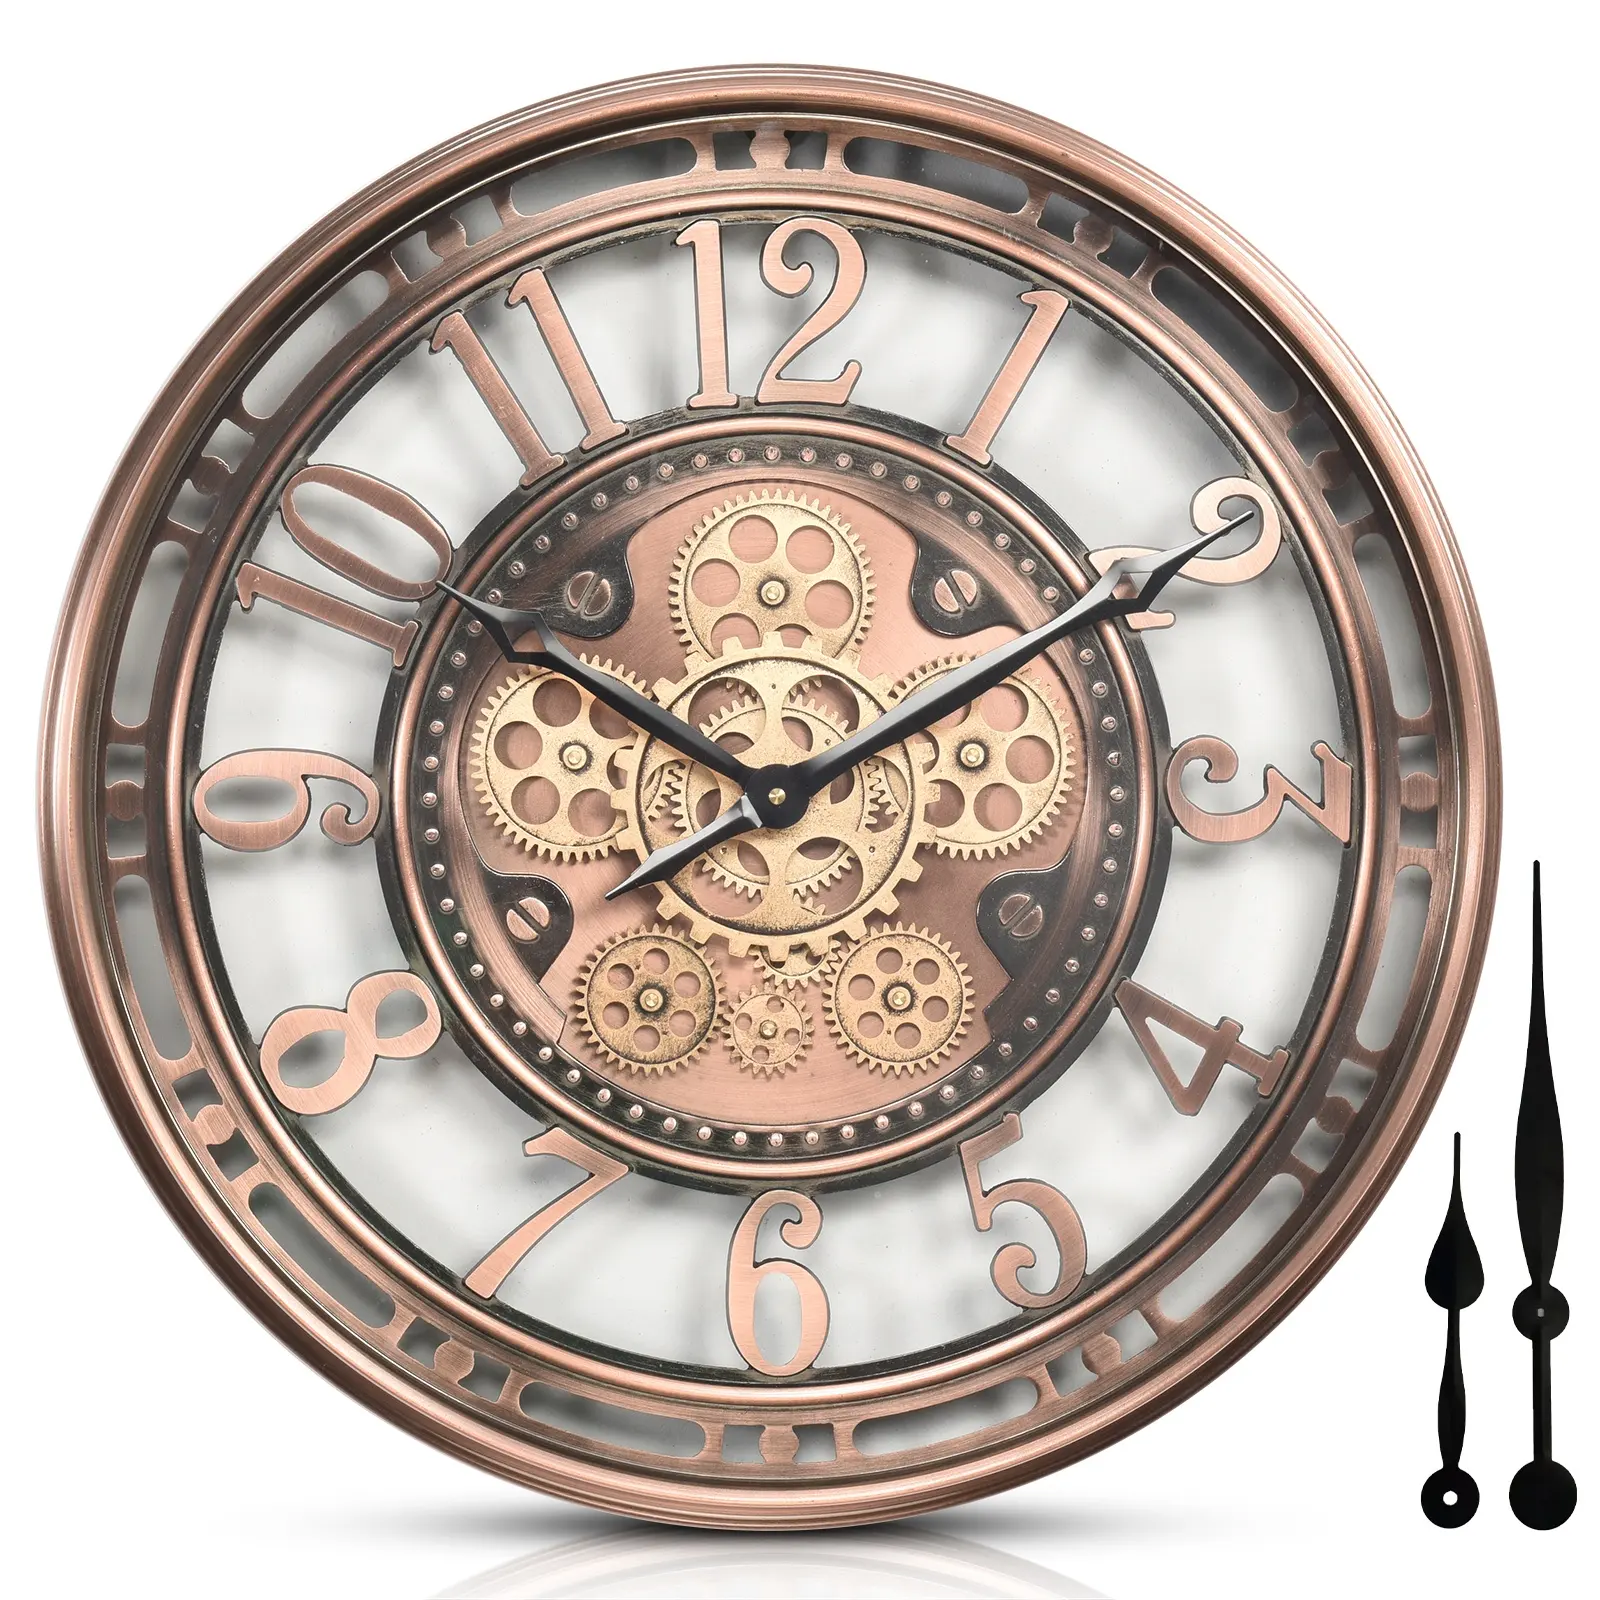 INFINITY TIME Steampunk Unique Vintage Rustic Unique 3D Wall Clock Large Industrial Loft Metal Moving Gear Wall Clock